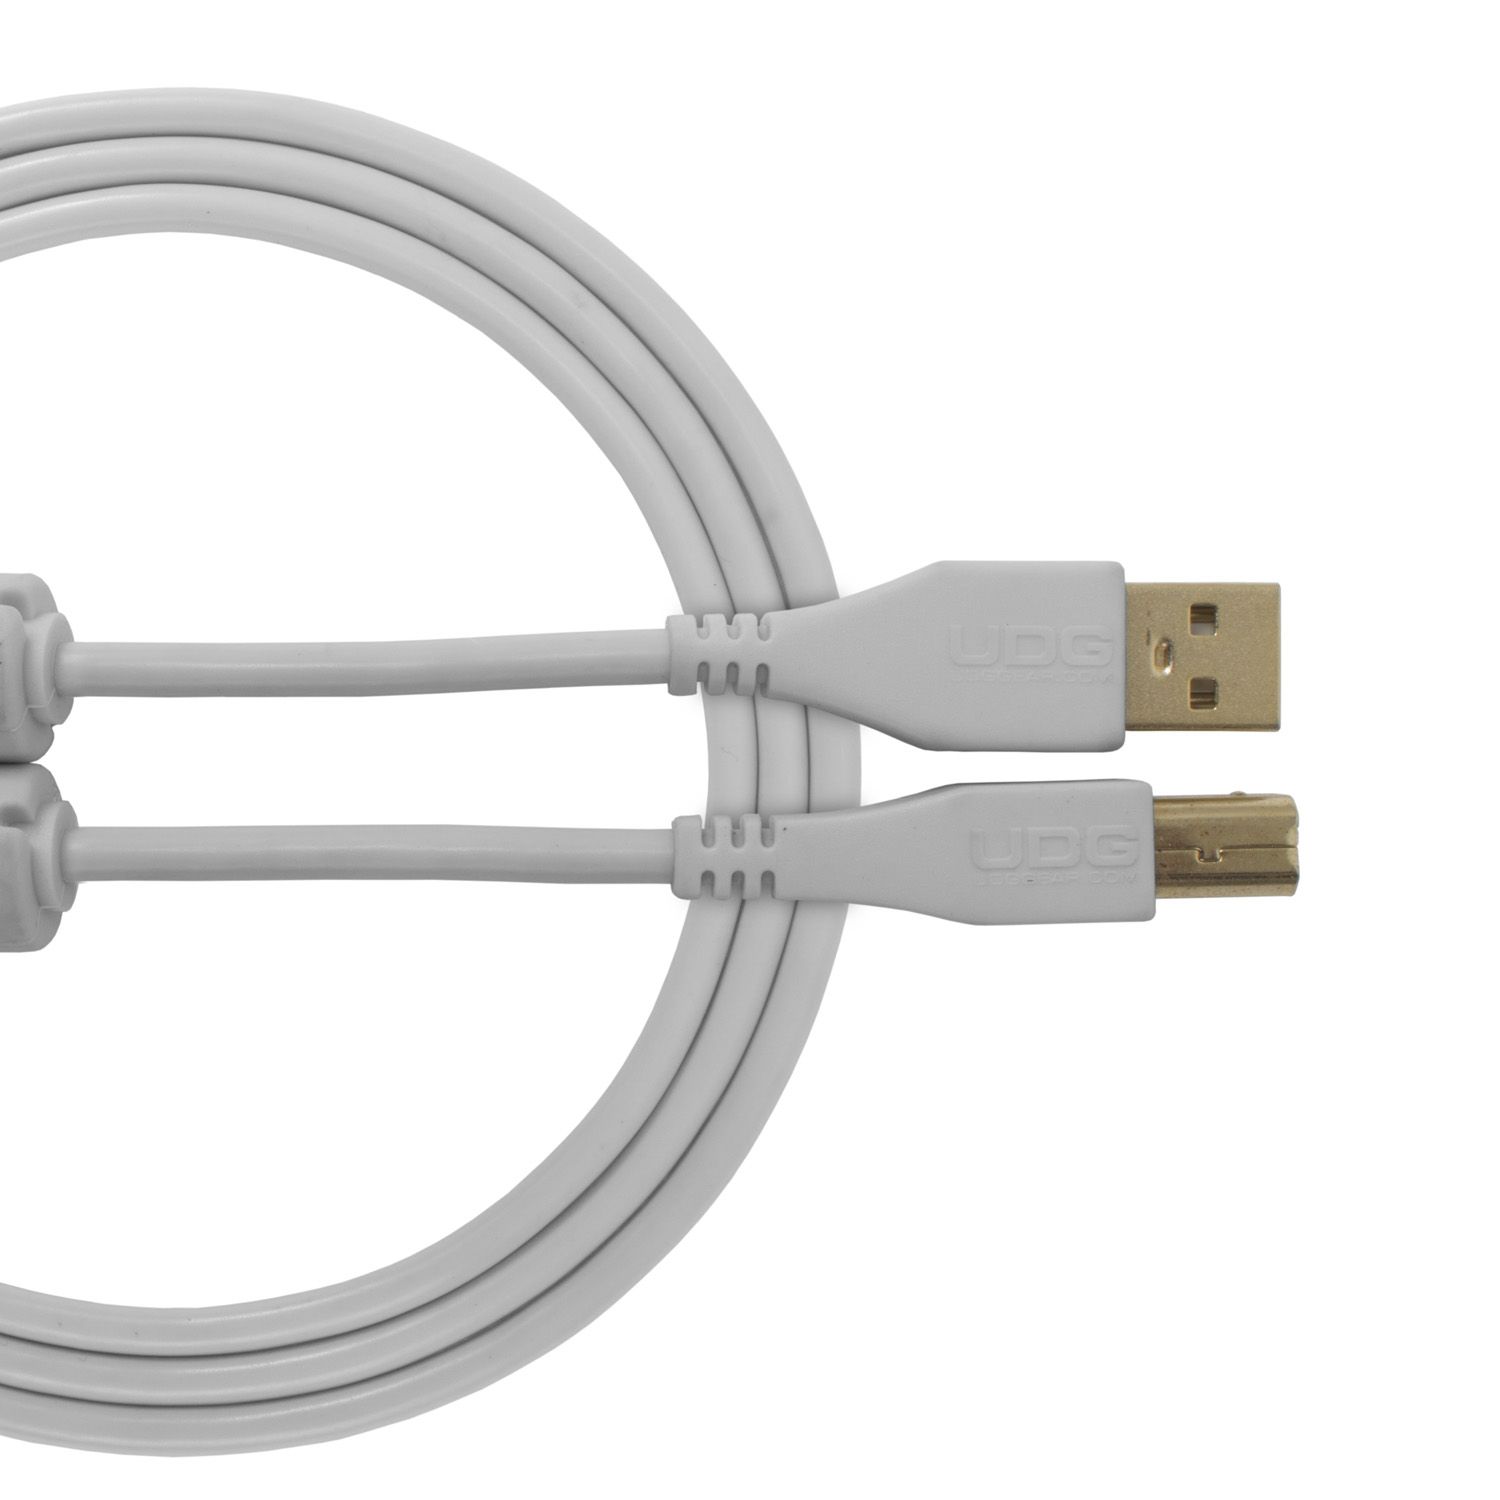 U95003WH UDG AUDIO CABLE USB 2.0 A-B WHITE STRA 3M